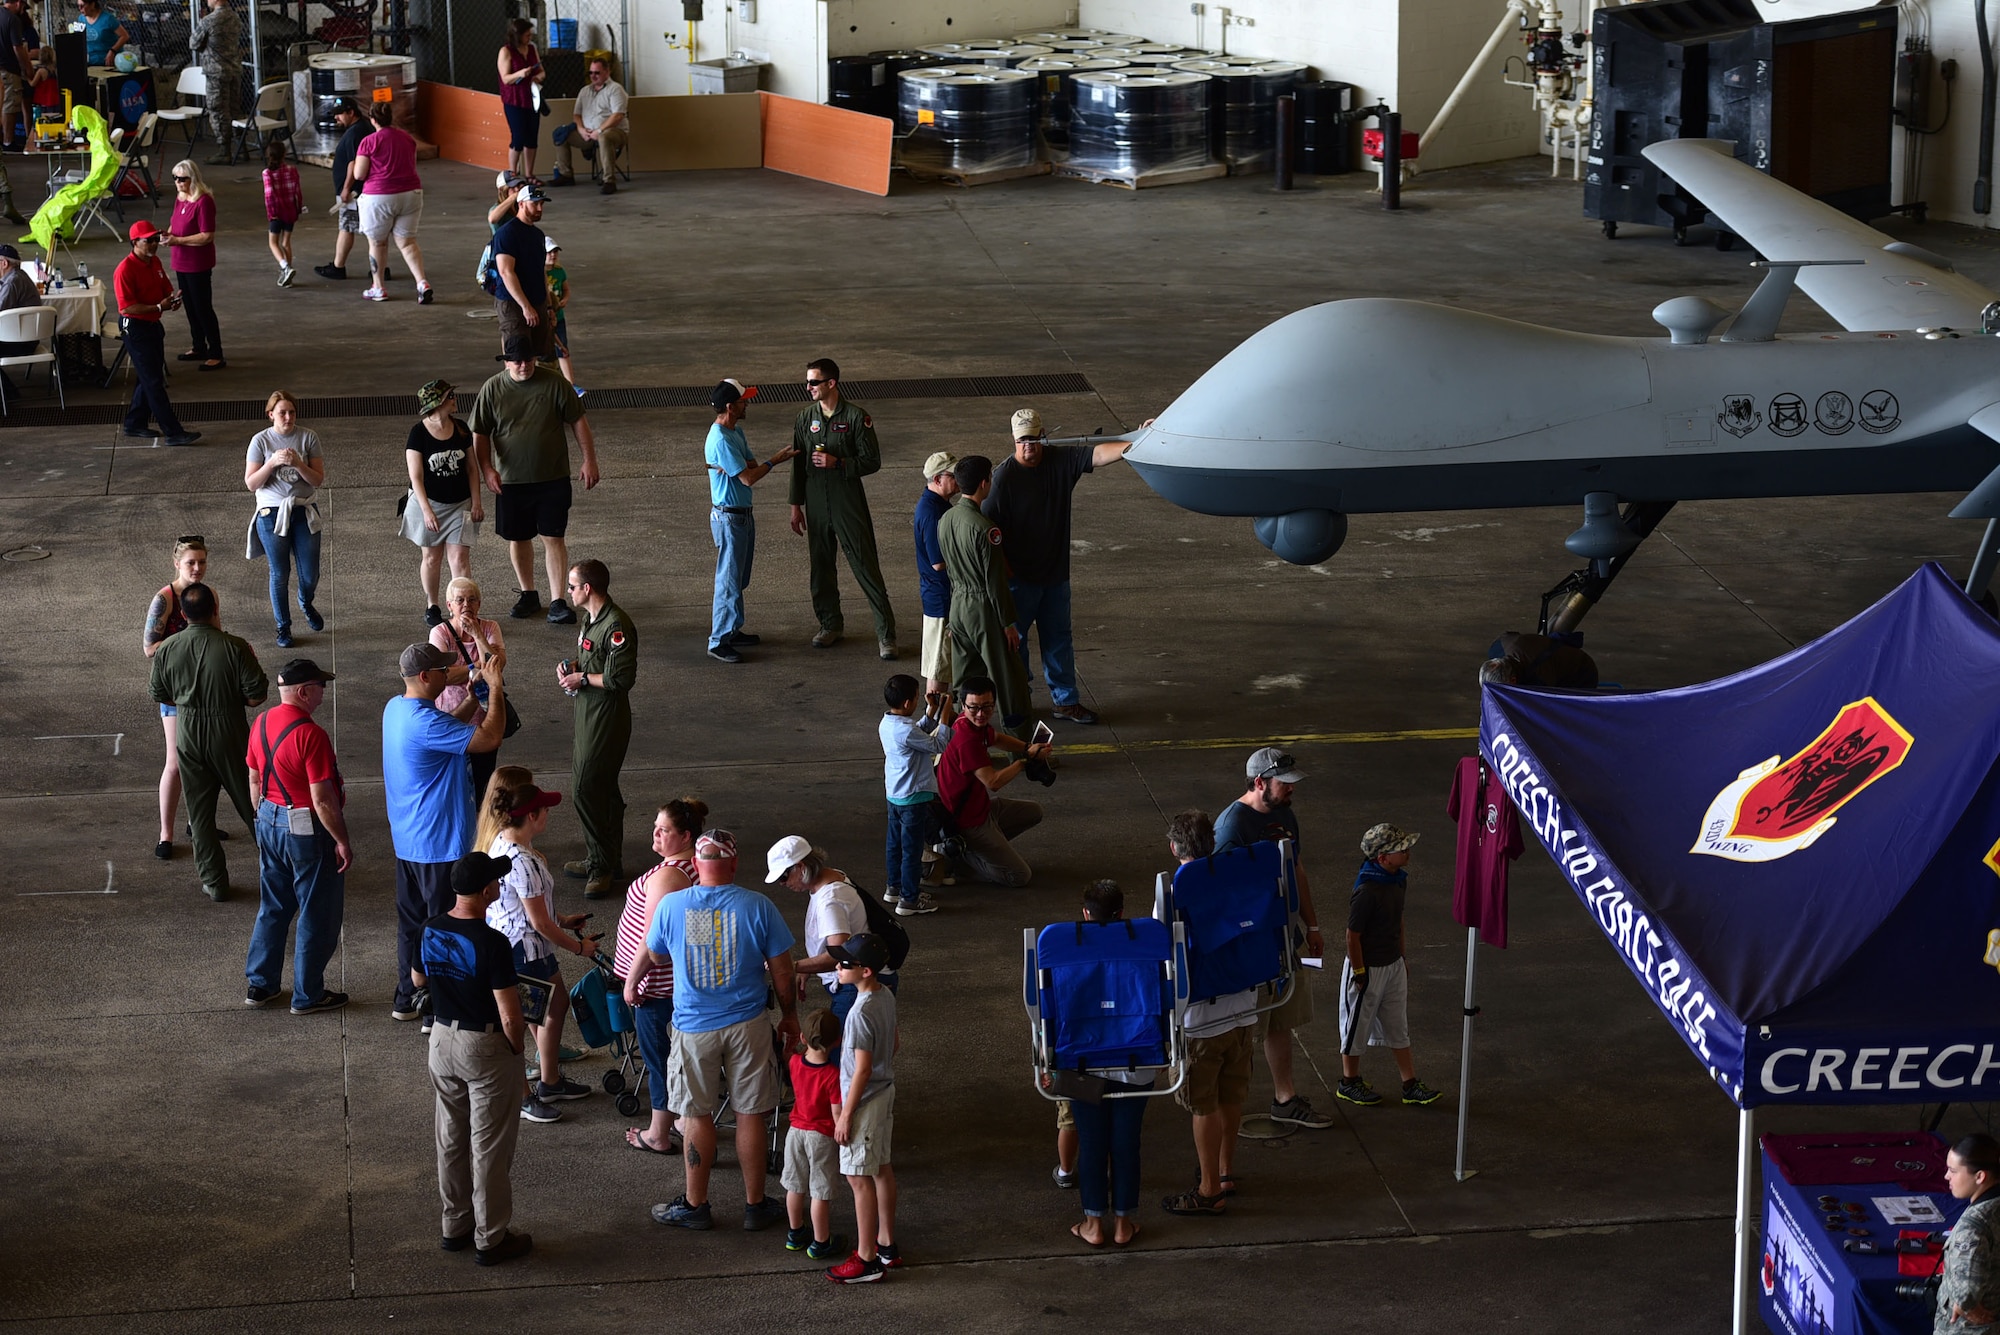 Spectators get an up-close and personal look at the MQ-9 Reaper April 28, 2018, during the Joint Base Charleston Air & Space Expo at JB Charleston, S.C. During the air show more than 80,000 spectators had the opportunity to learn about the MQ-9 and its mission from the Airmen who fly, maintain and support it. (U.S. Air Force photo by Senior Airman Christian Clausen)